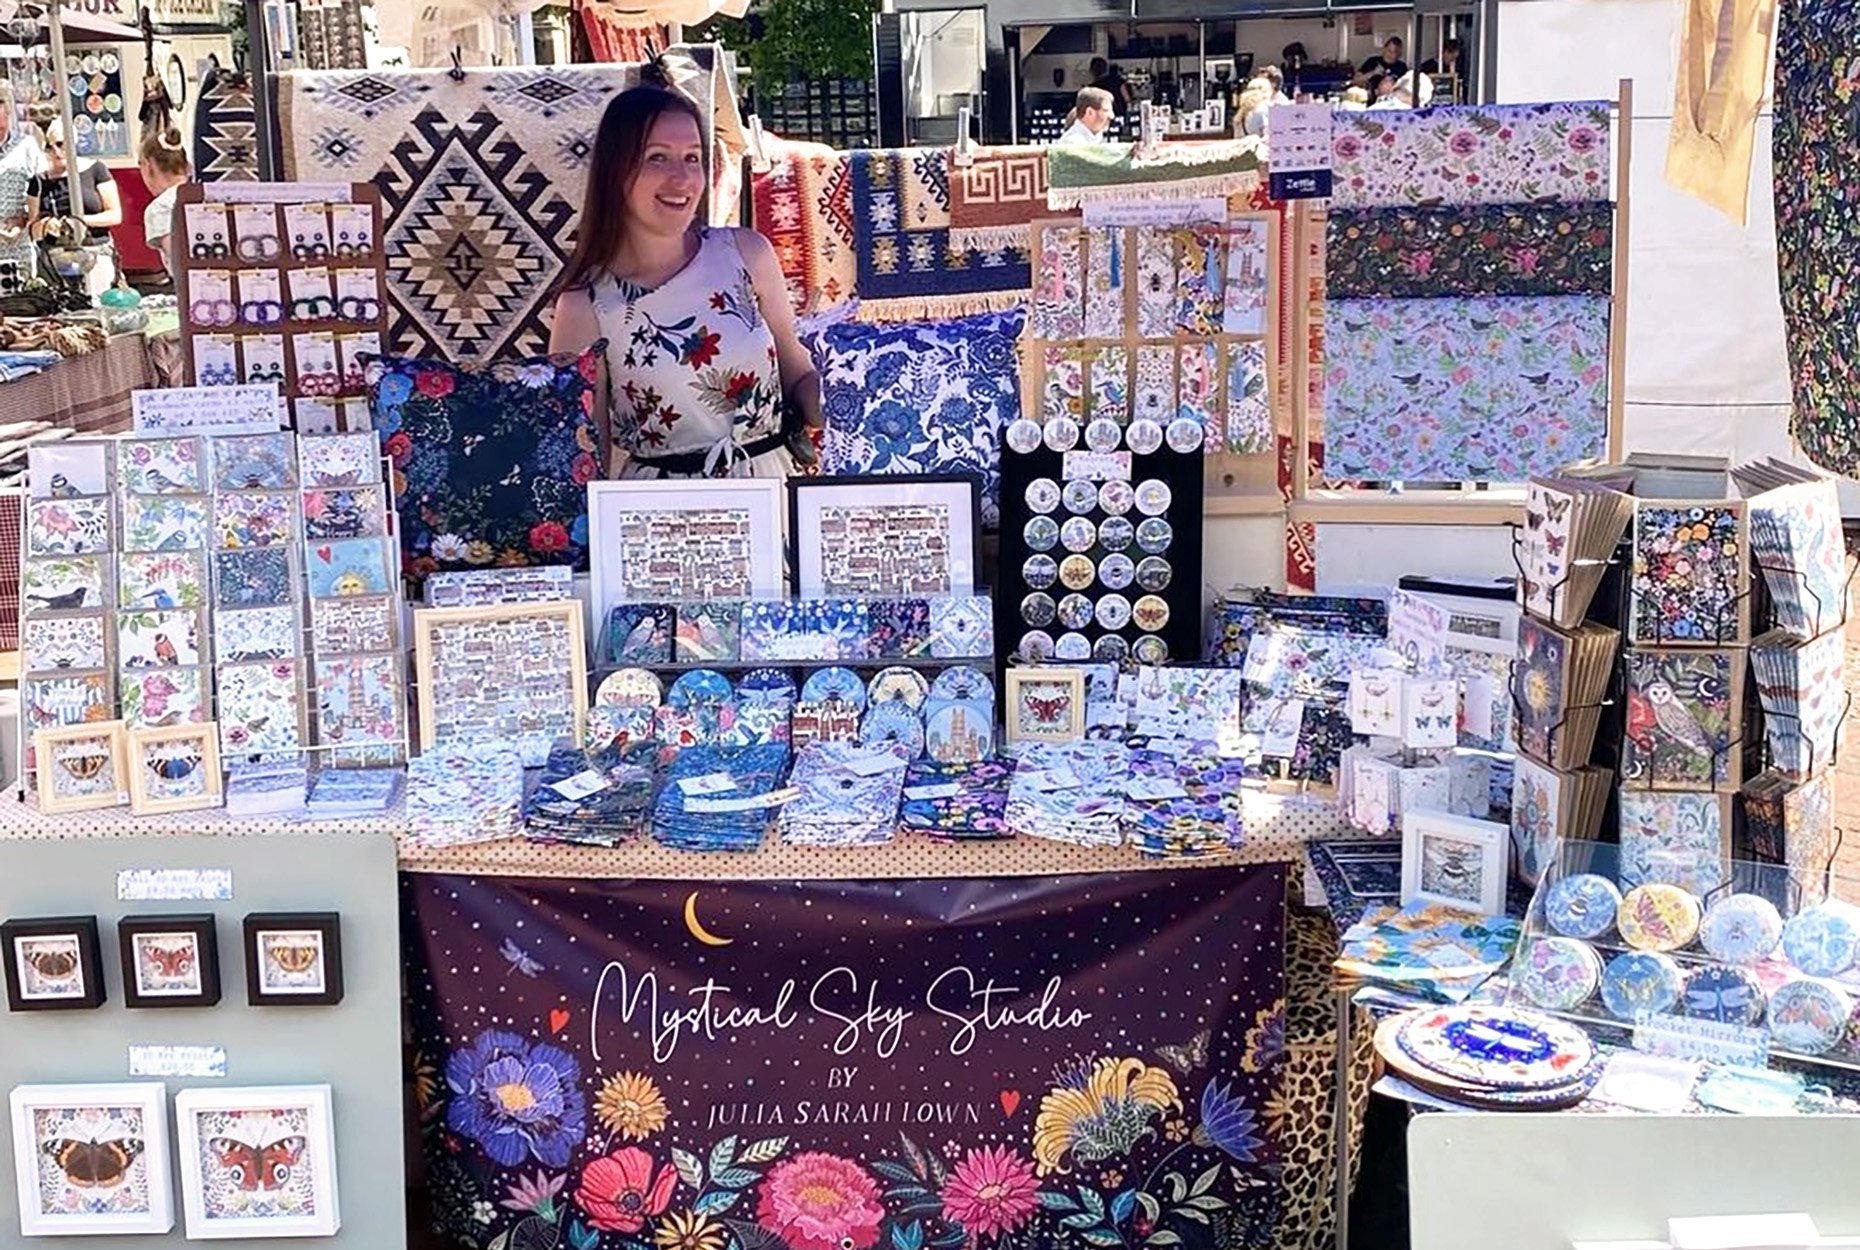 Julia Sarah Lown selling her products made using custom printed fabric